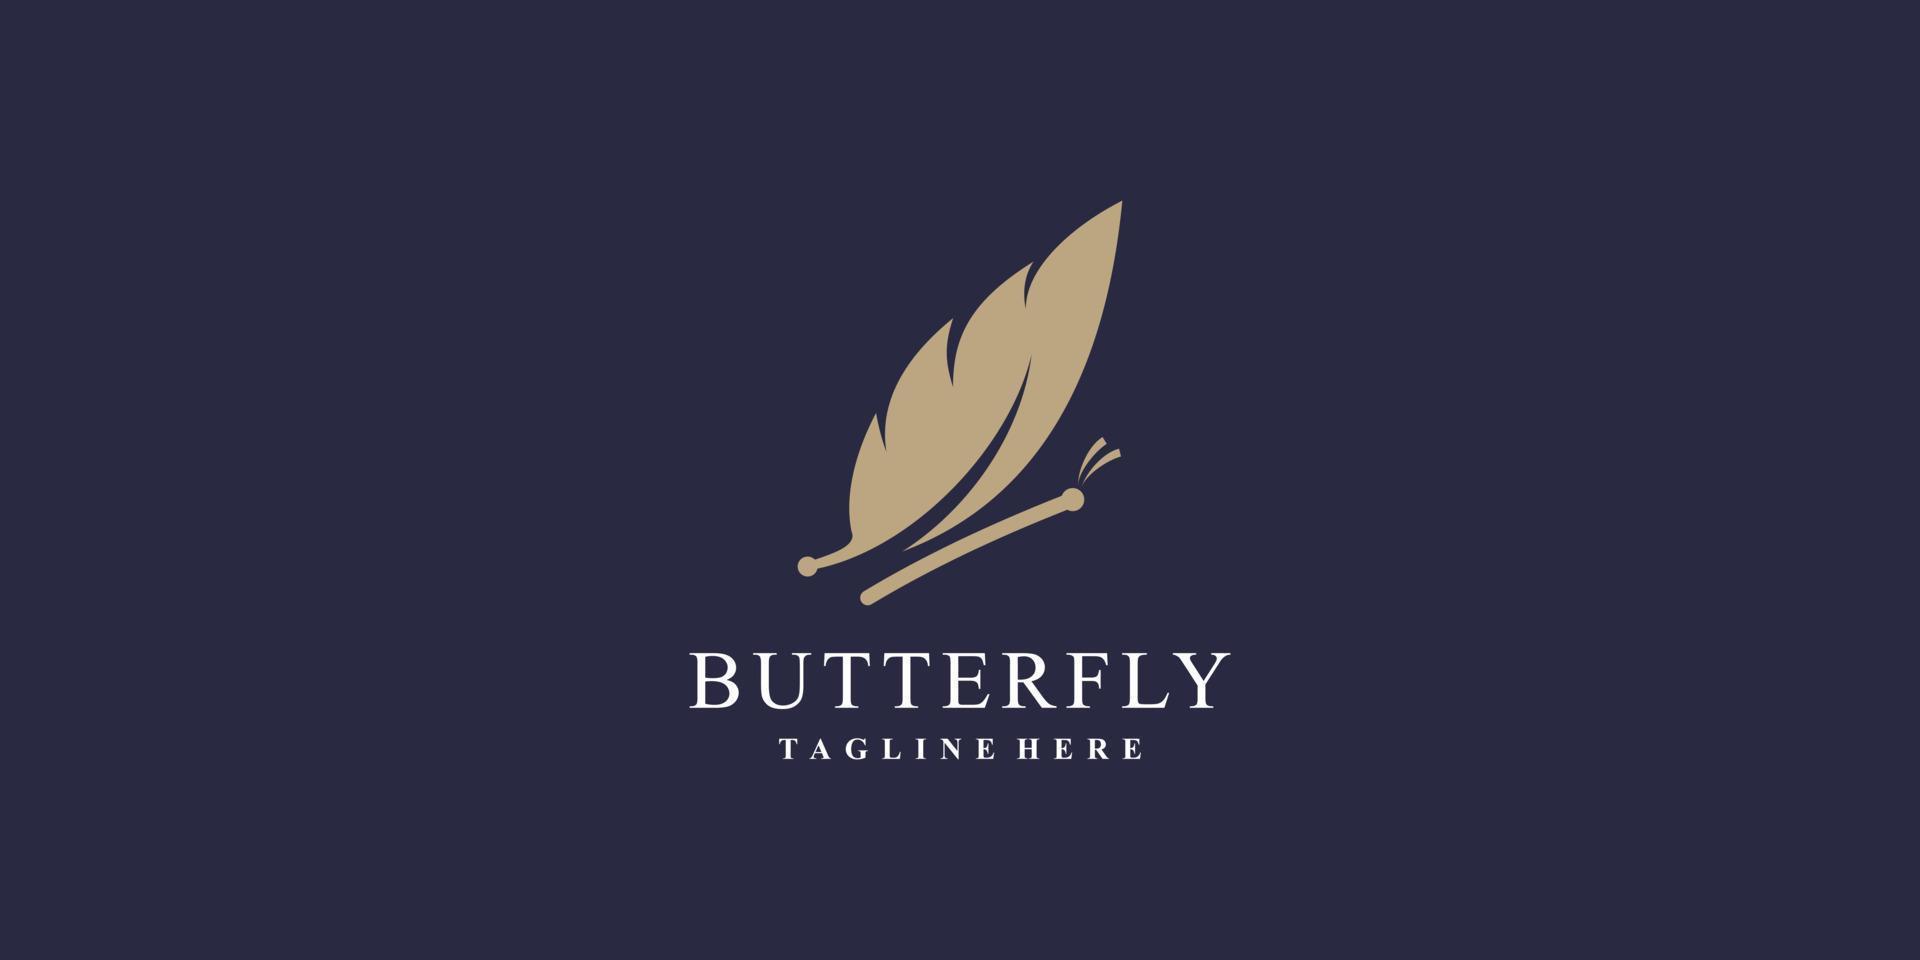 Butterfly logo design vector with creative abstract concept